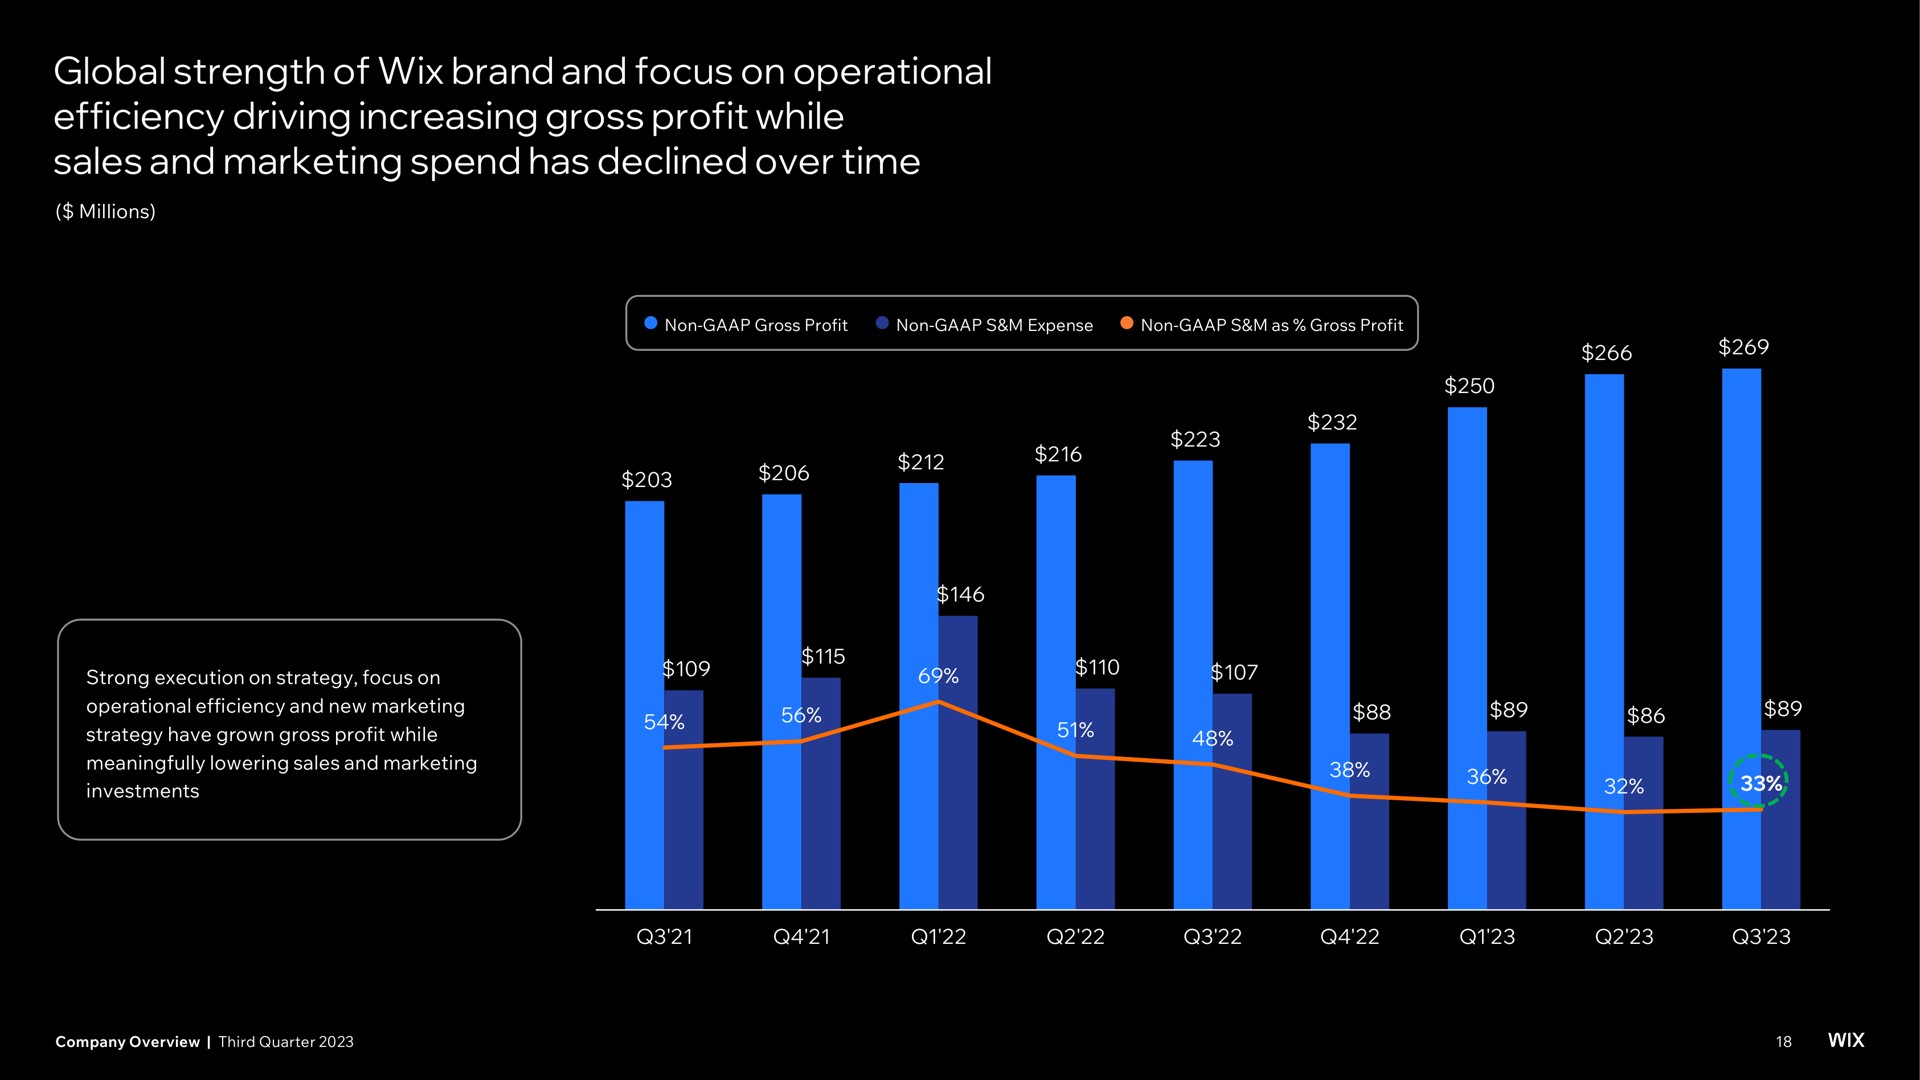 global strength of brand and focus on operational efficiency driving increasing gross profit while sales and marketing spend has declined over time | Wix